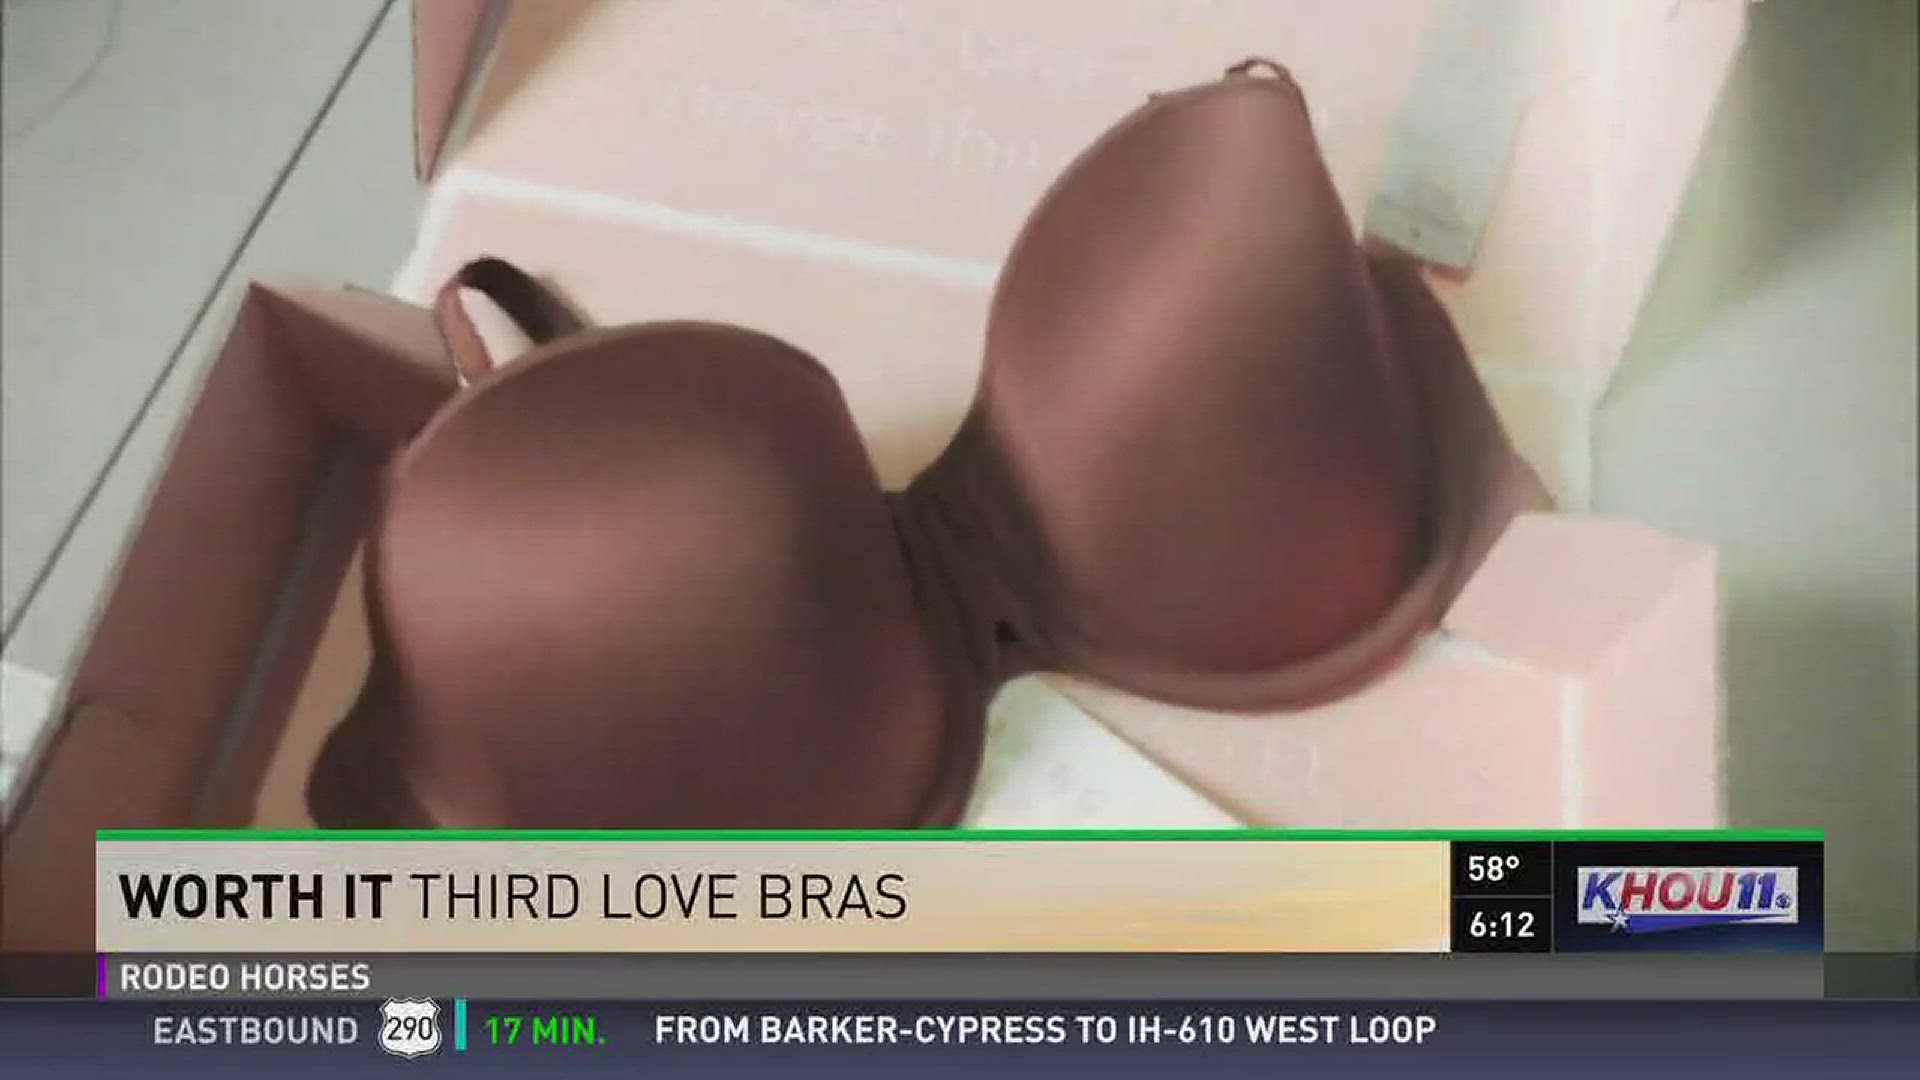 HURRY! Our #1 bra is on sale for a few more hours - Third Love